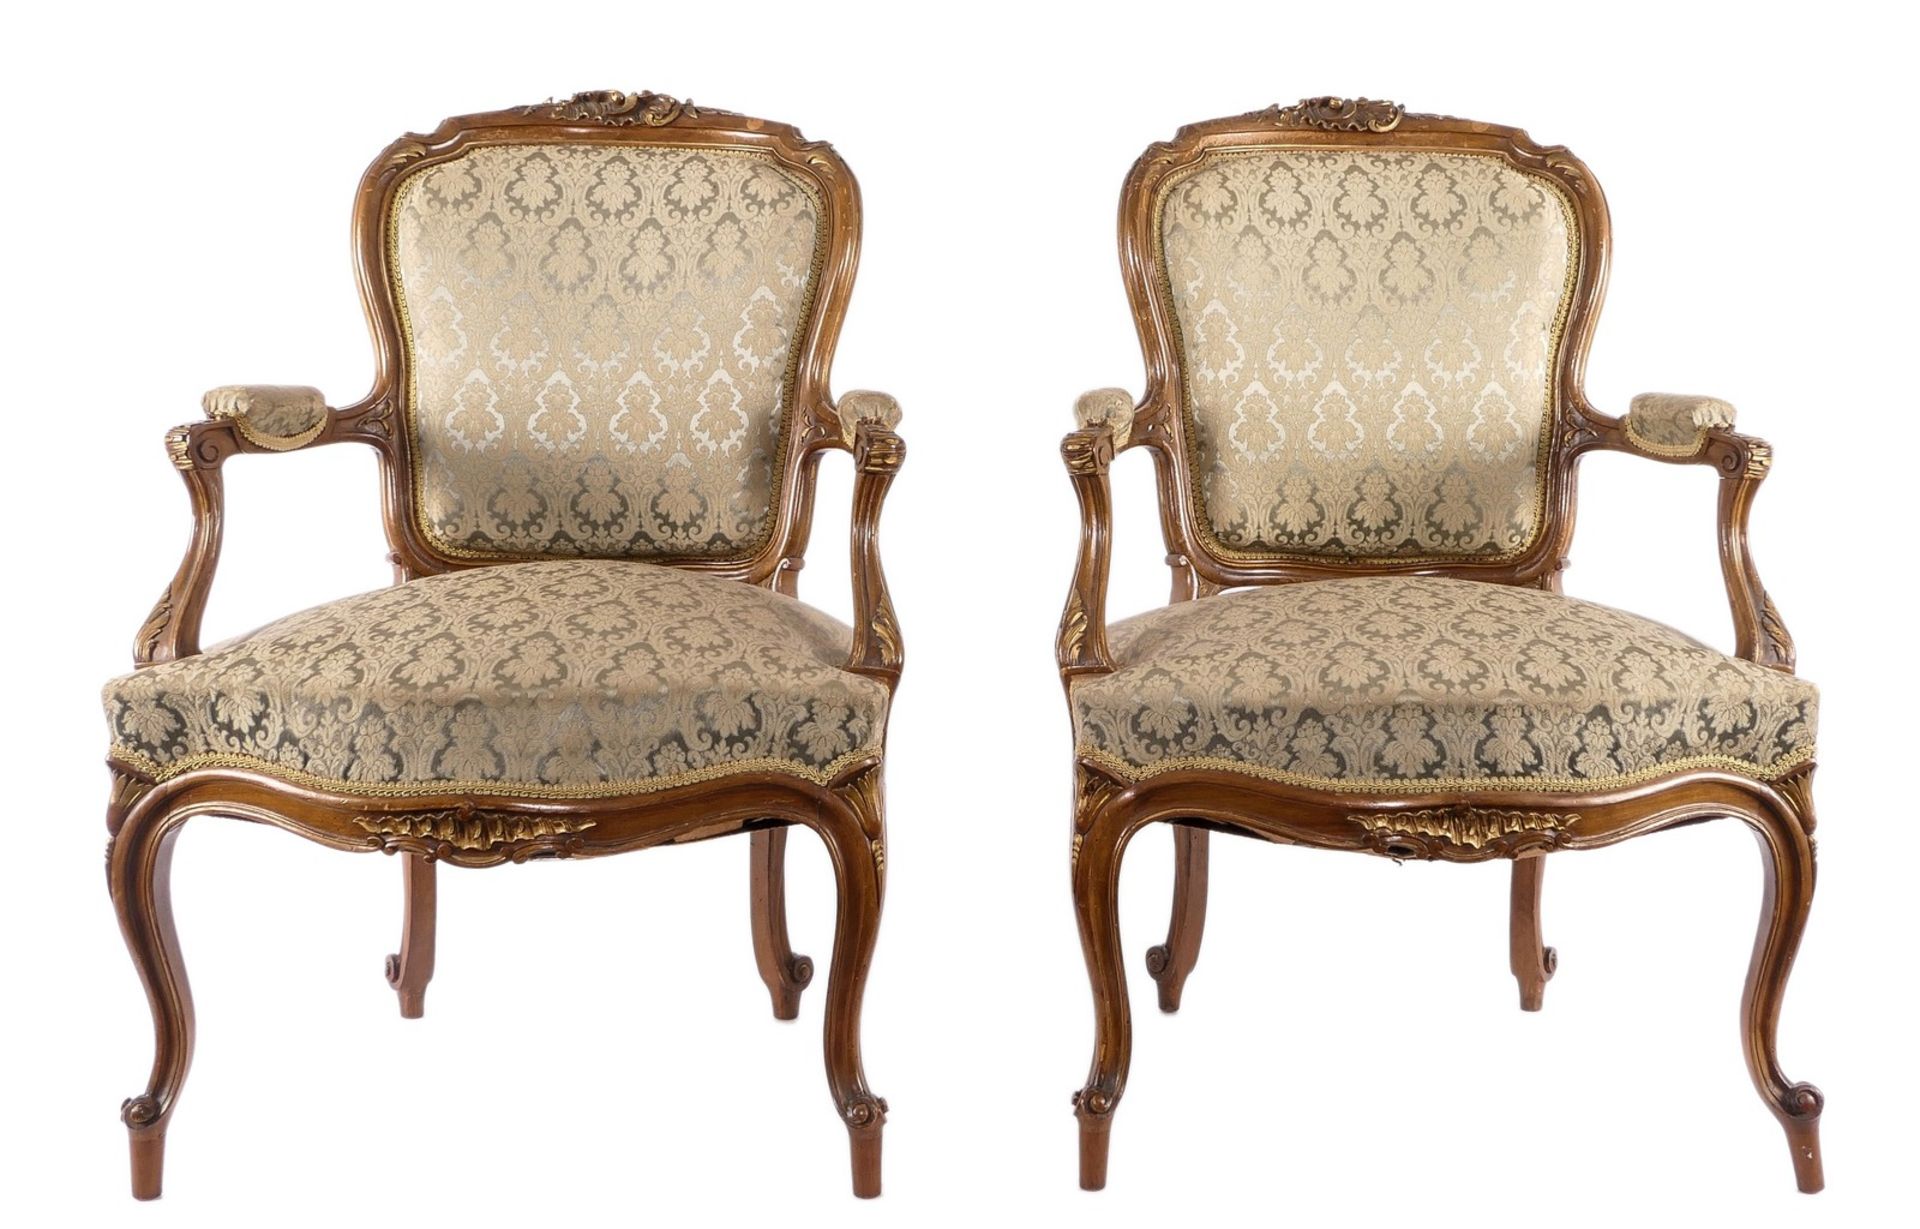 A pair of fine sculpted rococo style fauteuils, beachwood, the sculpture gilt, H 96 - W 63 - D 69,